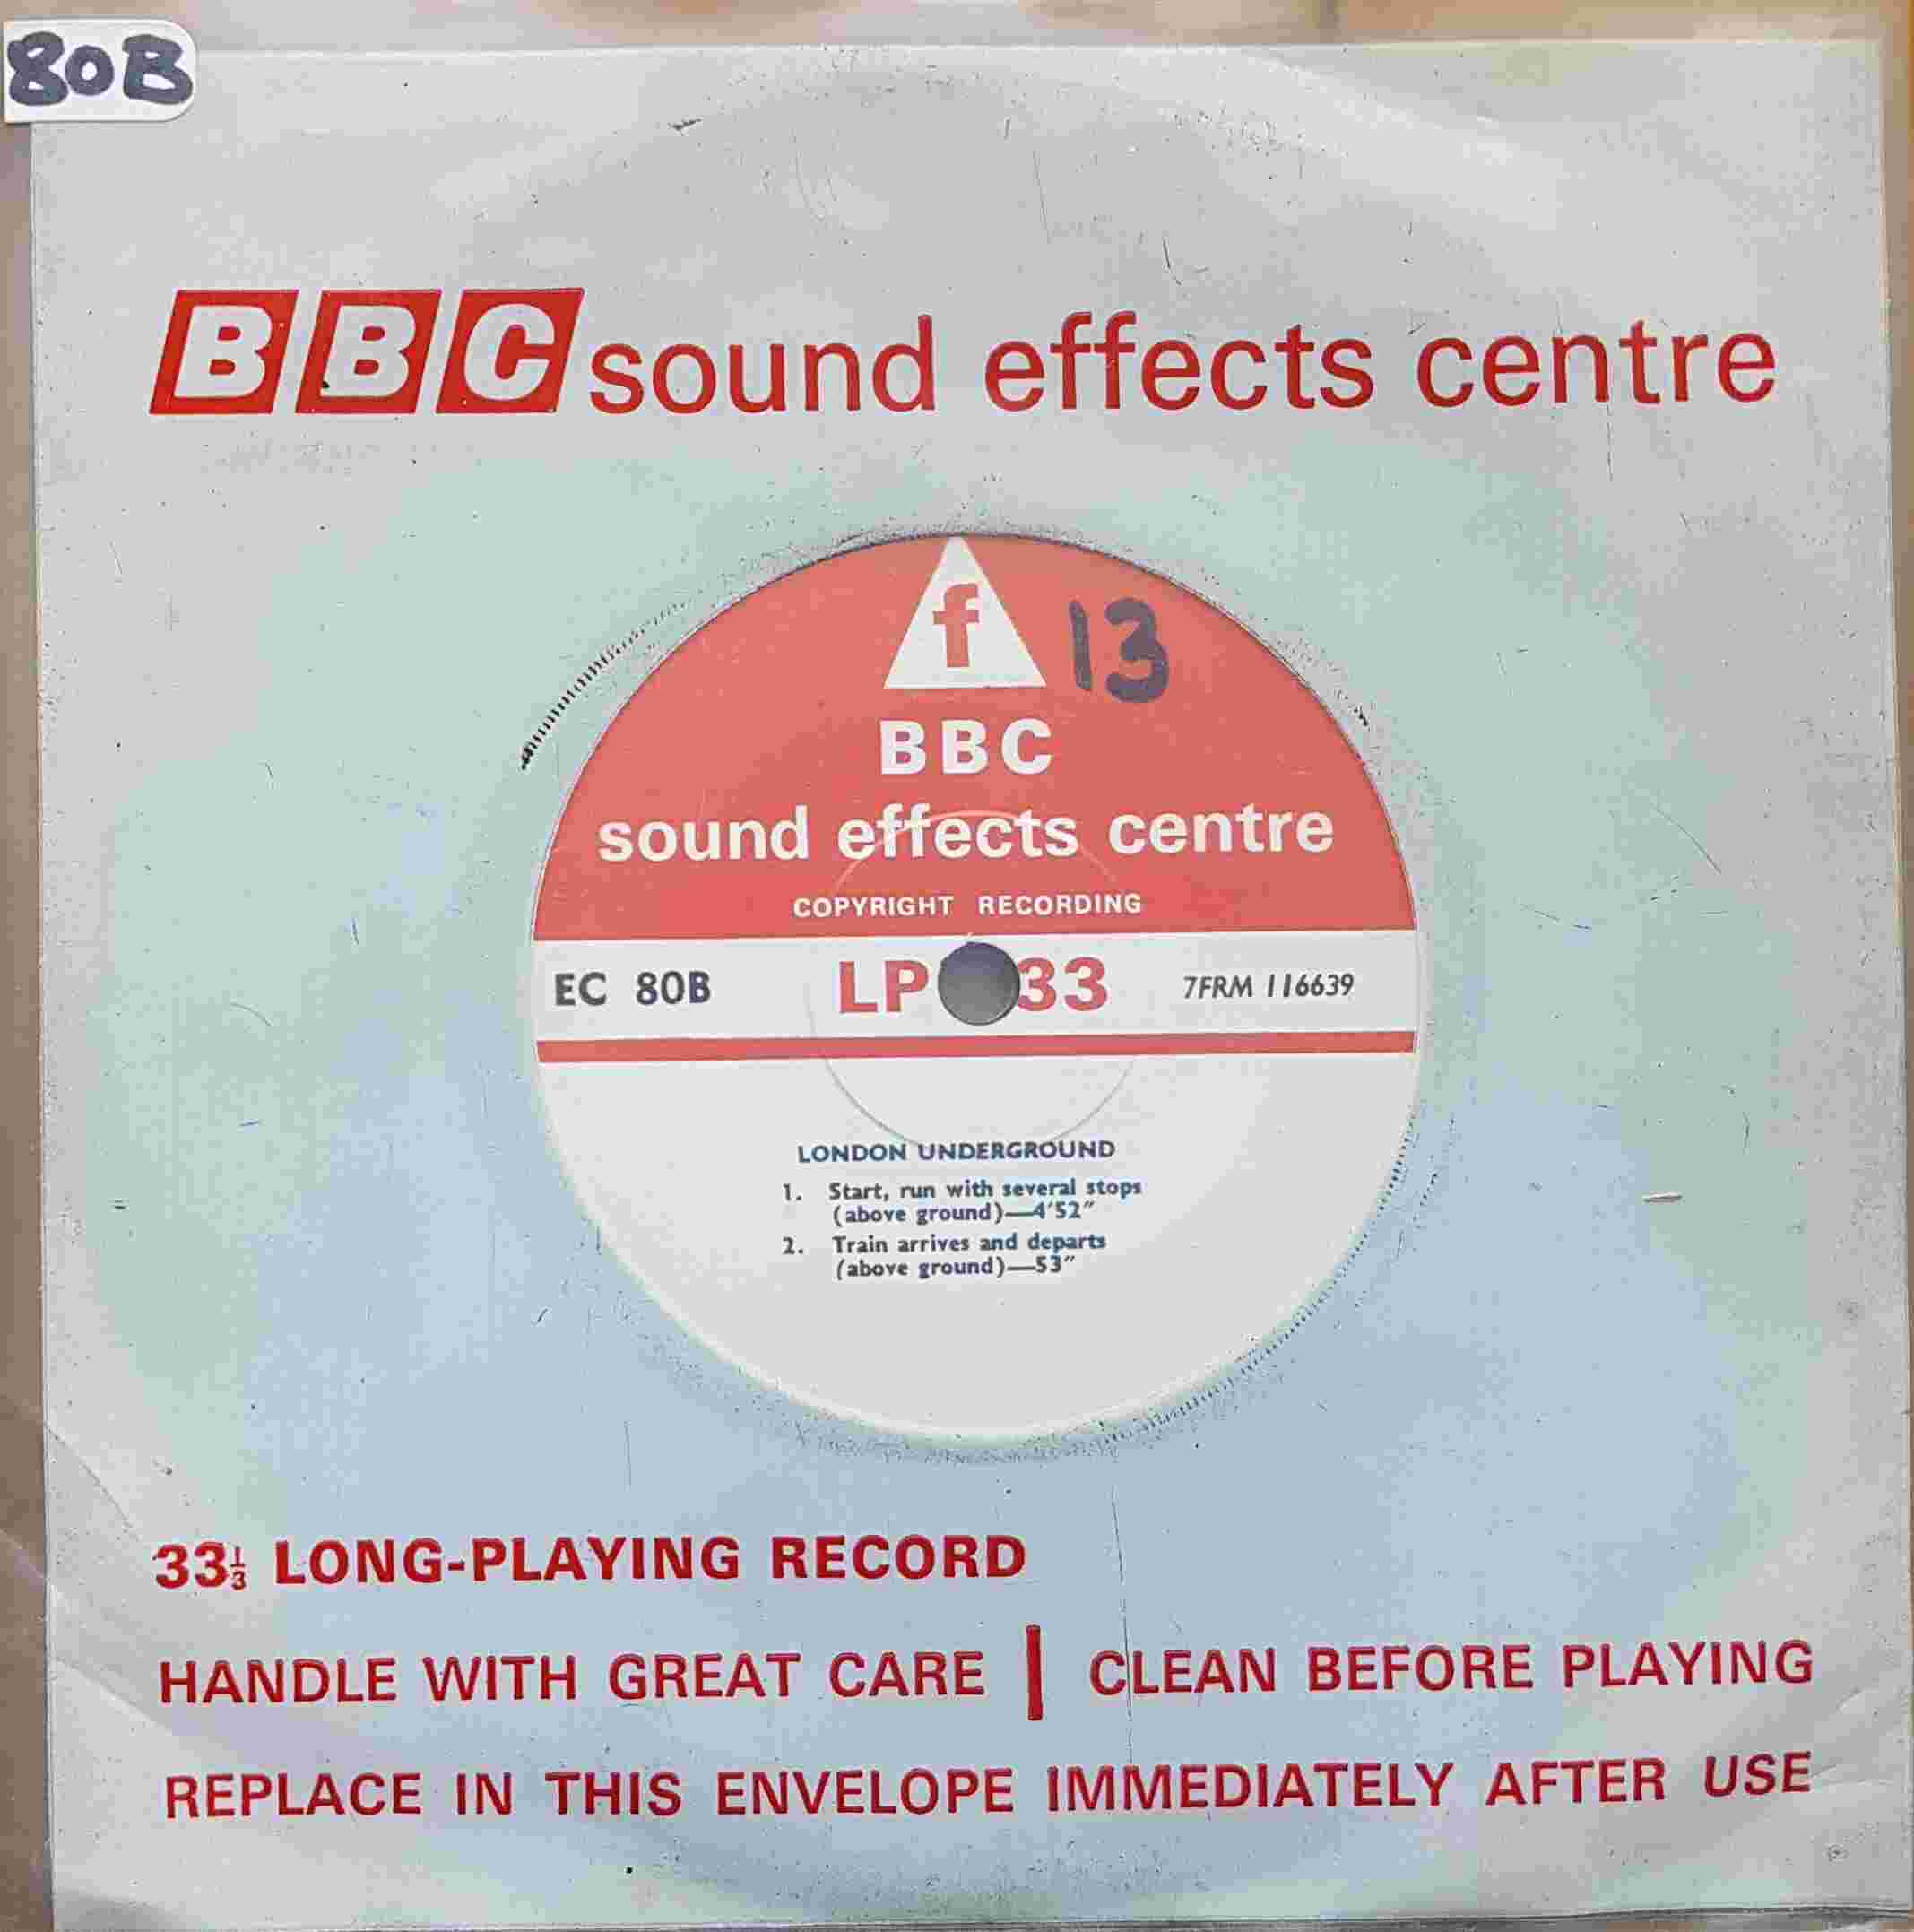 Picture of EC 80B London Underground by artist Not registered from the BBC records and Tapes library